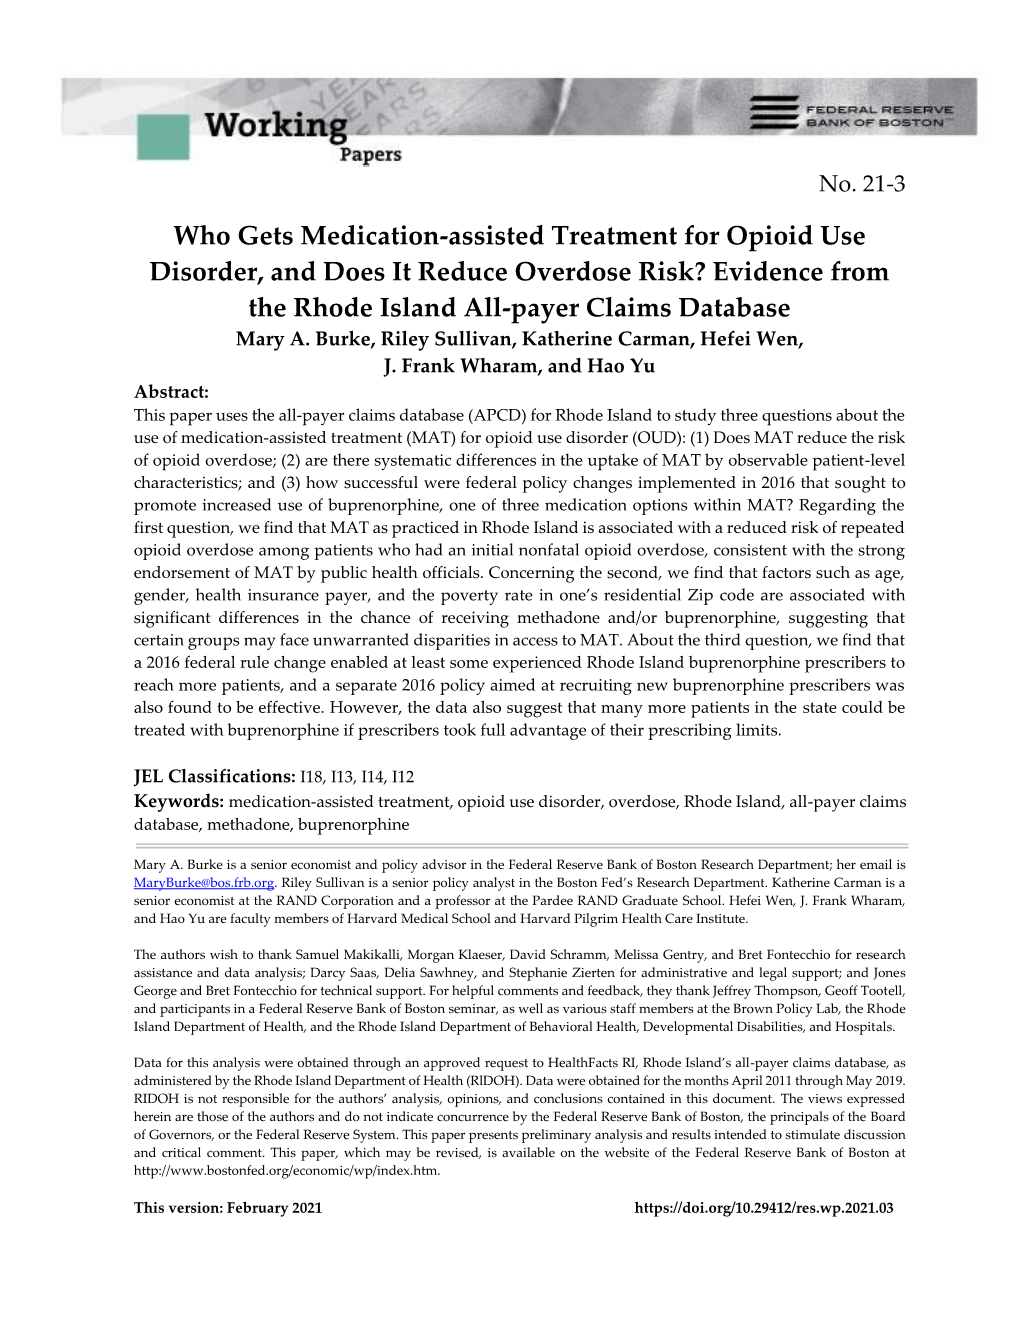 Who Gets Medication-Assisted Treatment for Opioid Use Disorder, and Does It Reduce Overdose Risk? Evidence from the Rhode Island All-Payer Claims Database Mary A